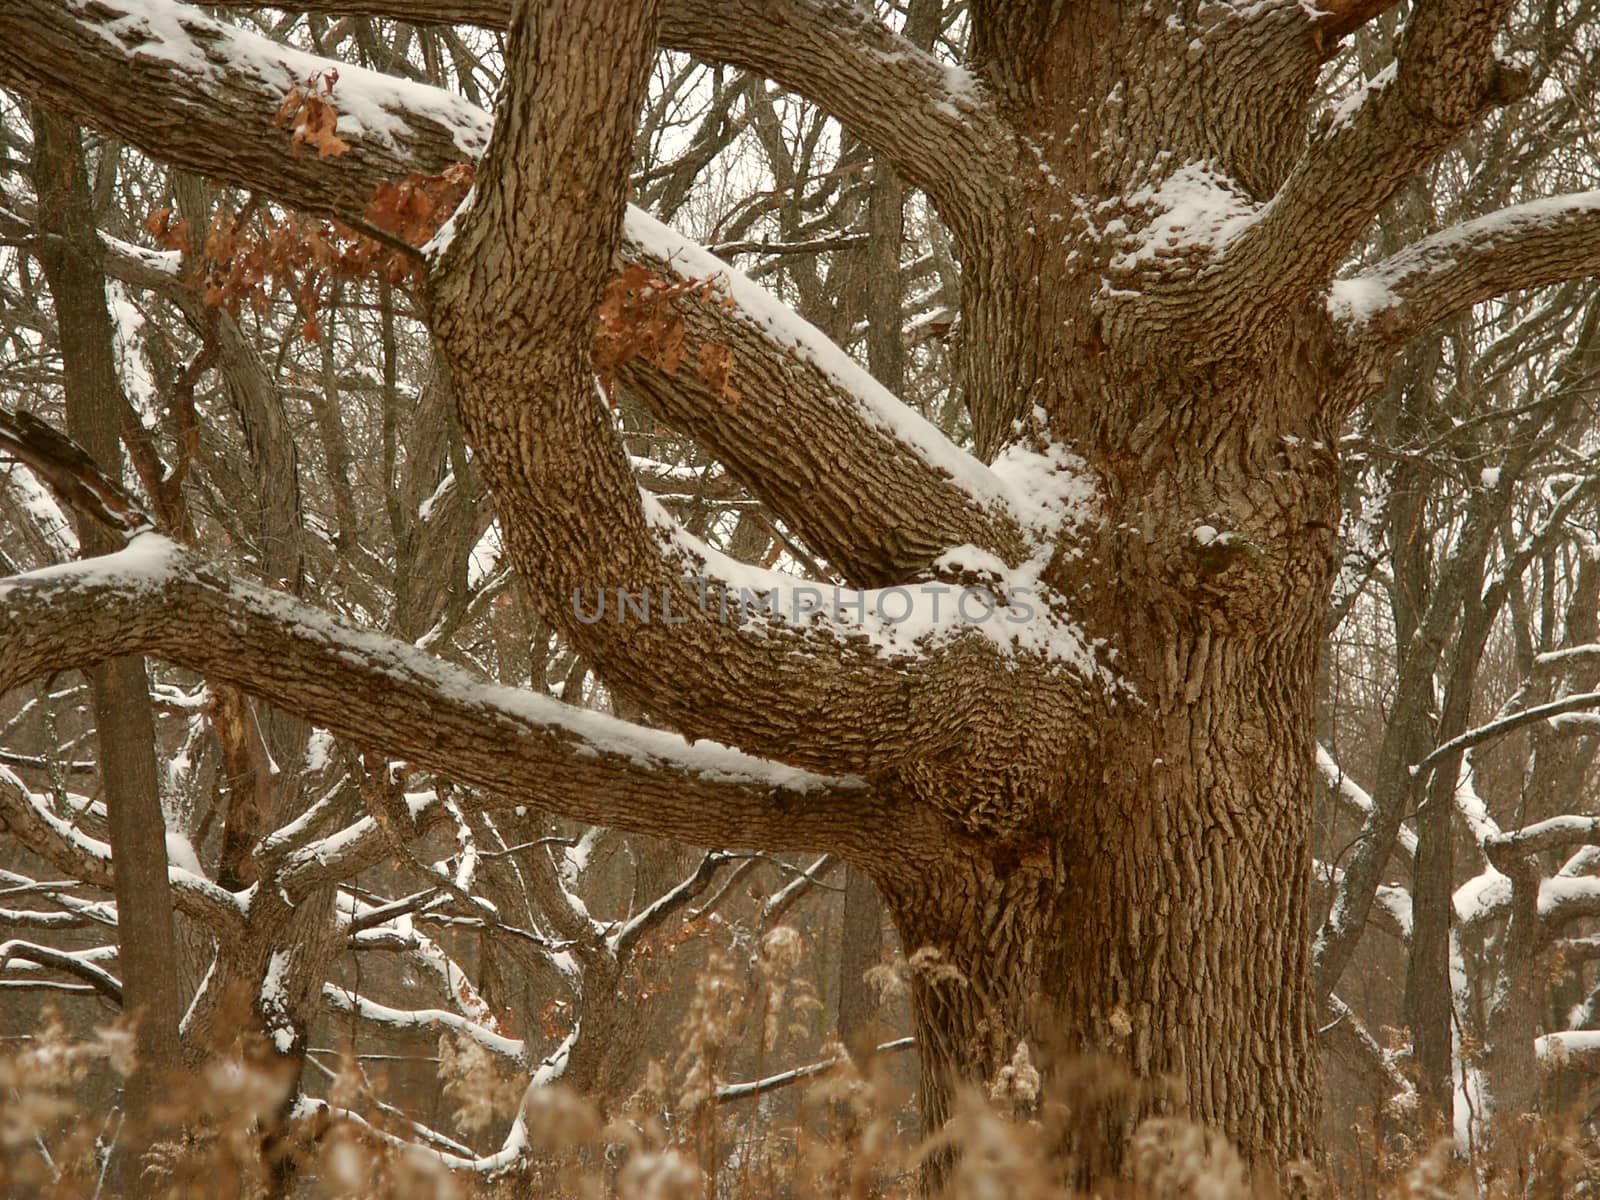 Oak tree dusted with winter snow in the Midwest United States.